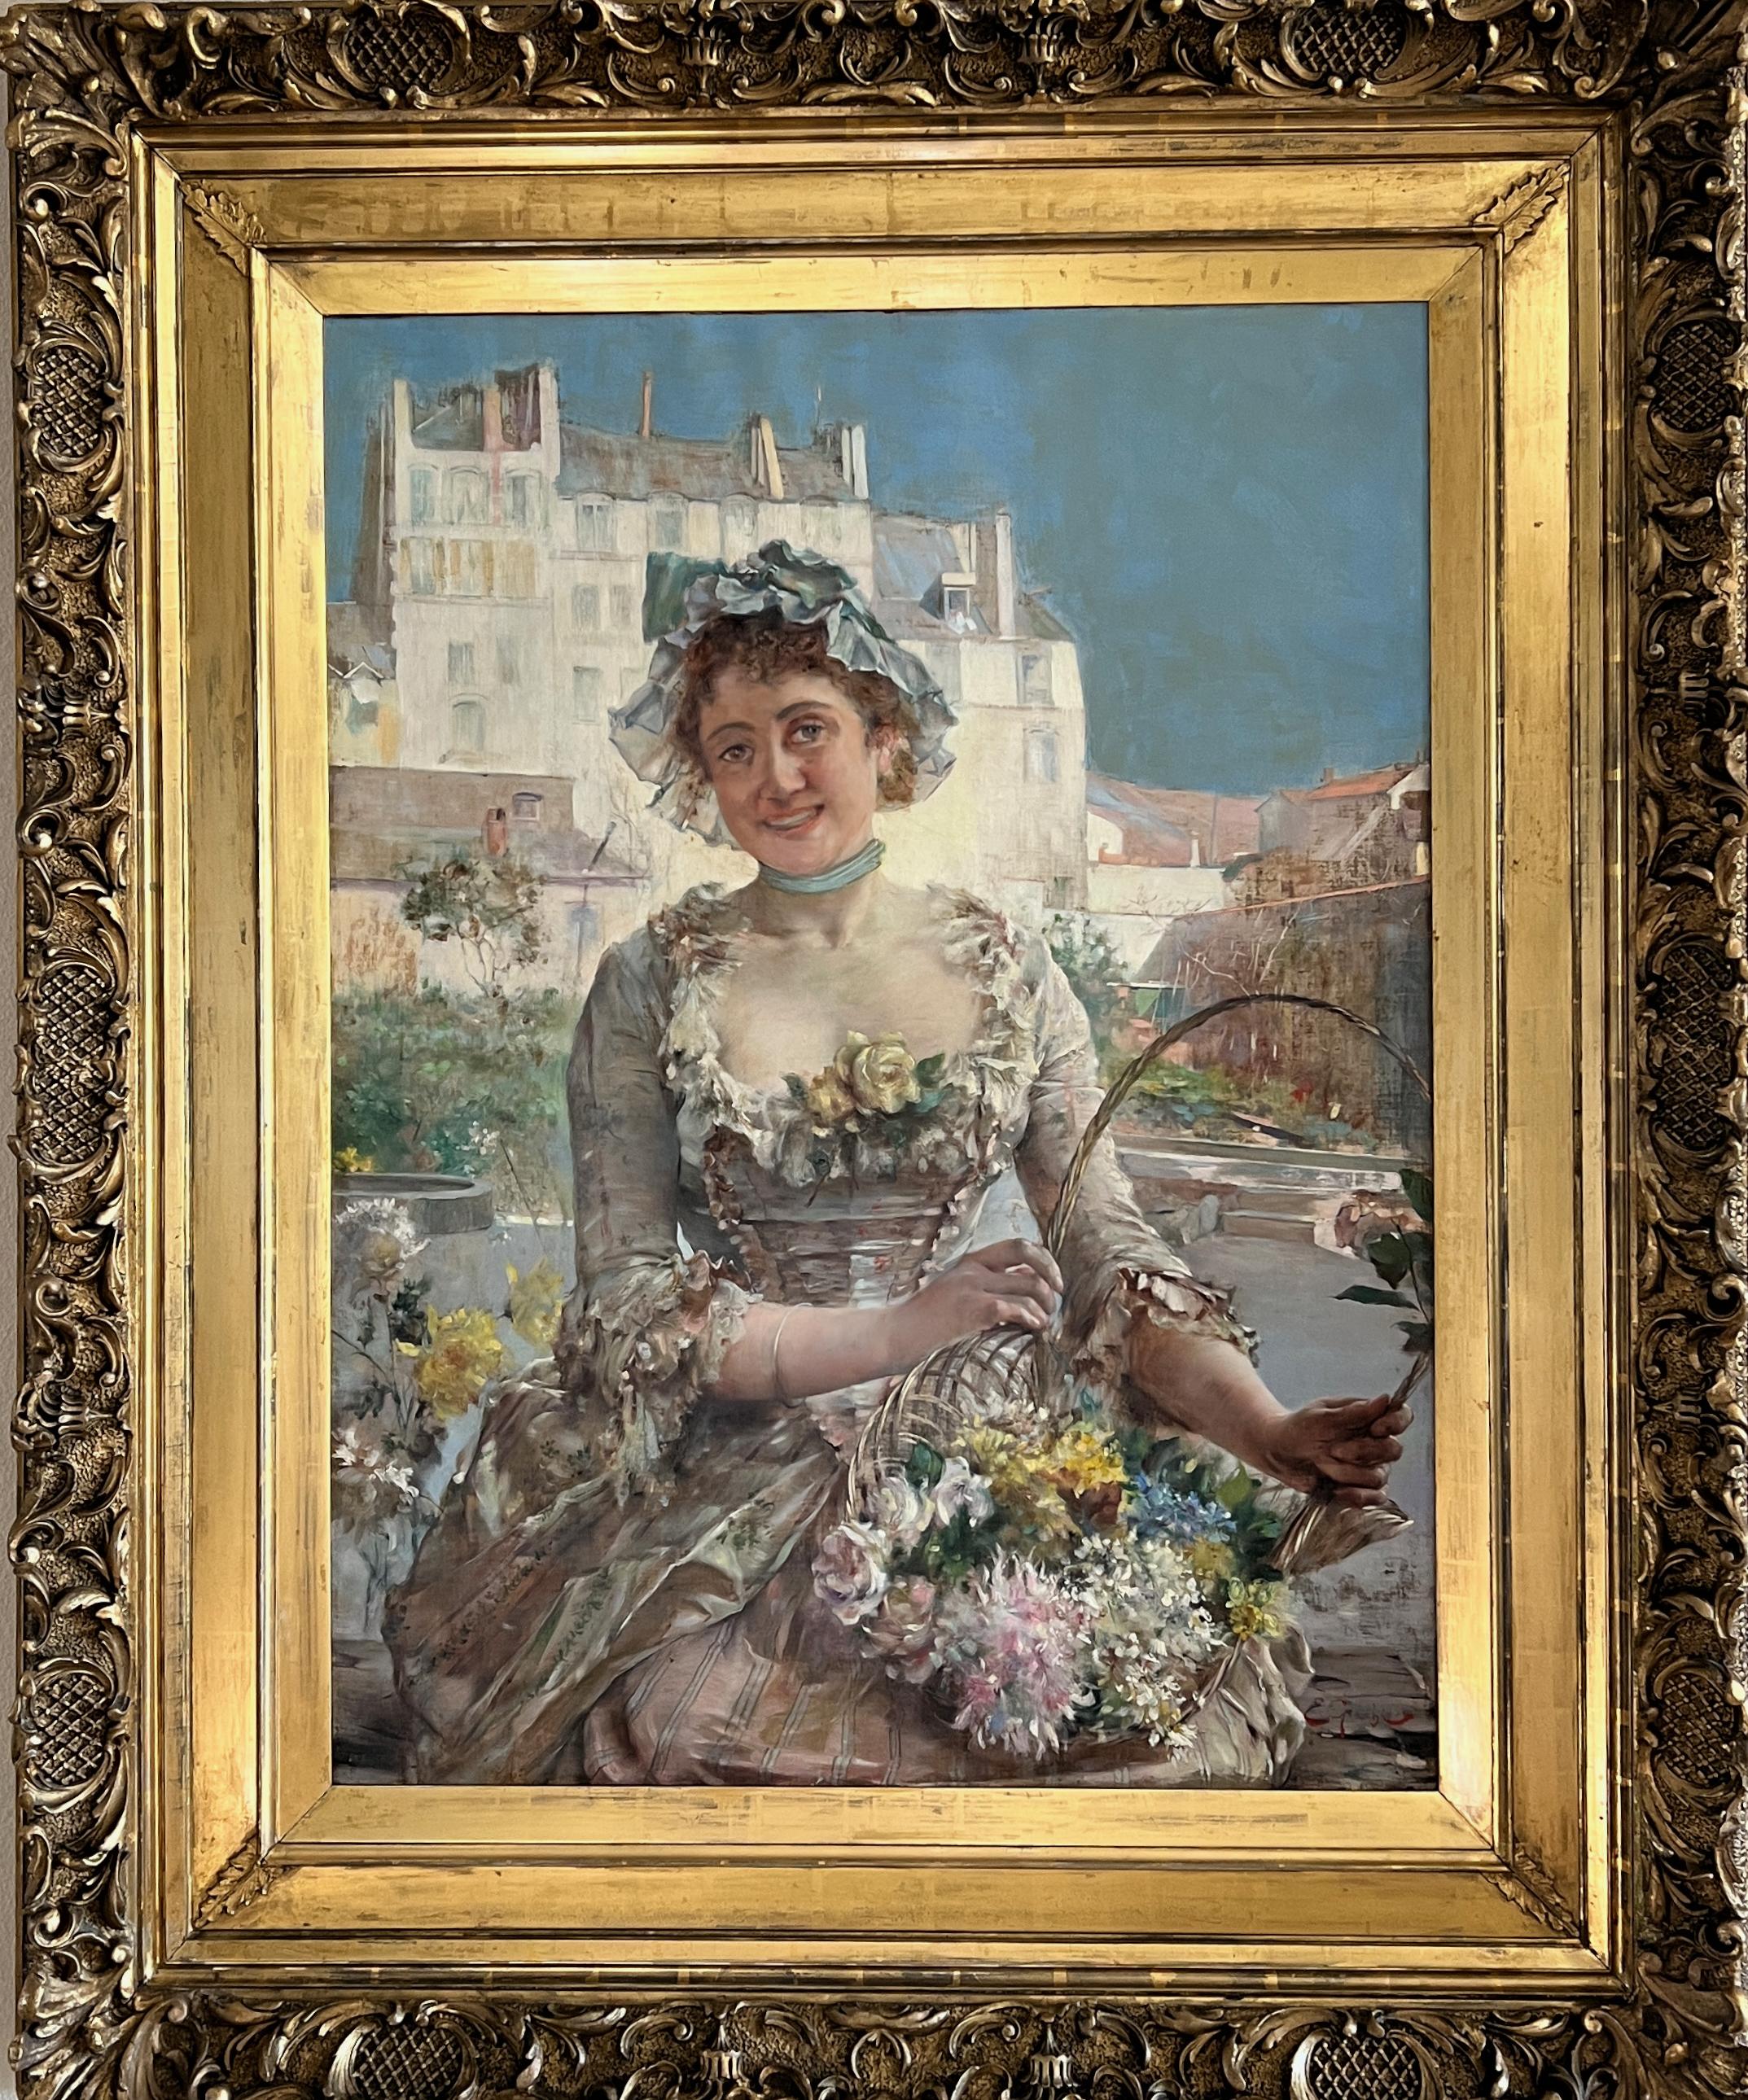 FLOWER GIRL by E. Giachi dress & flowers in Italian town landscape LARGE 19th c For Sale 11